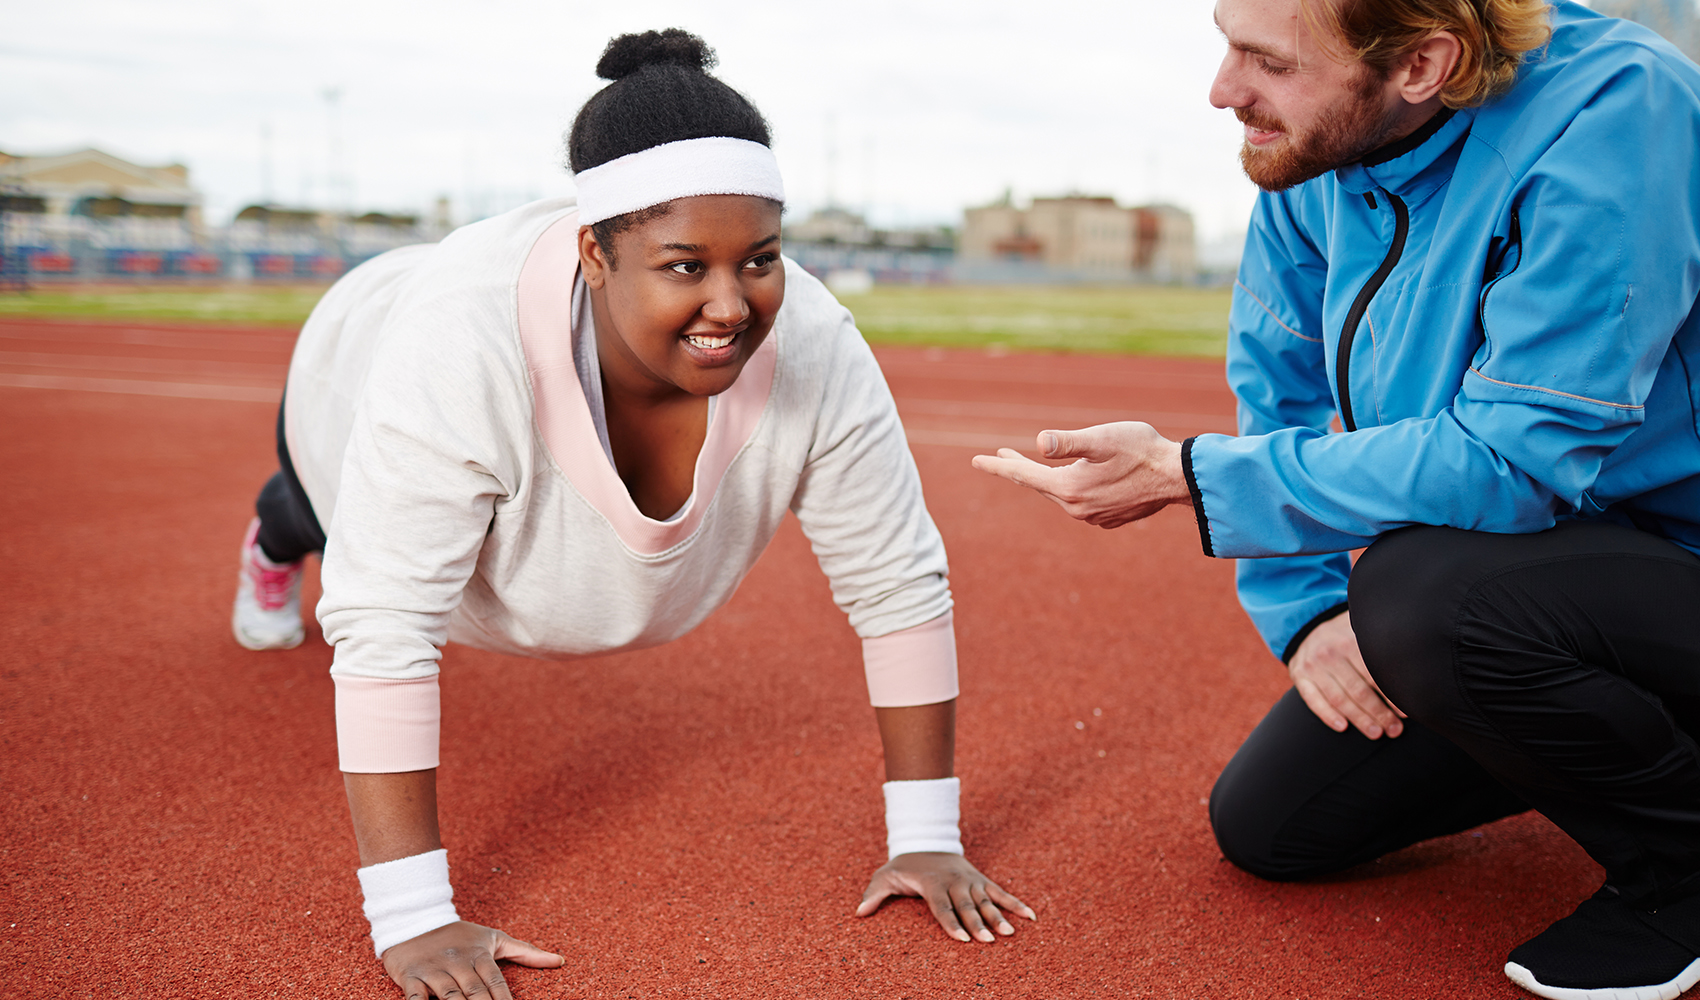 How to Become a Physical Trainer